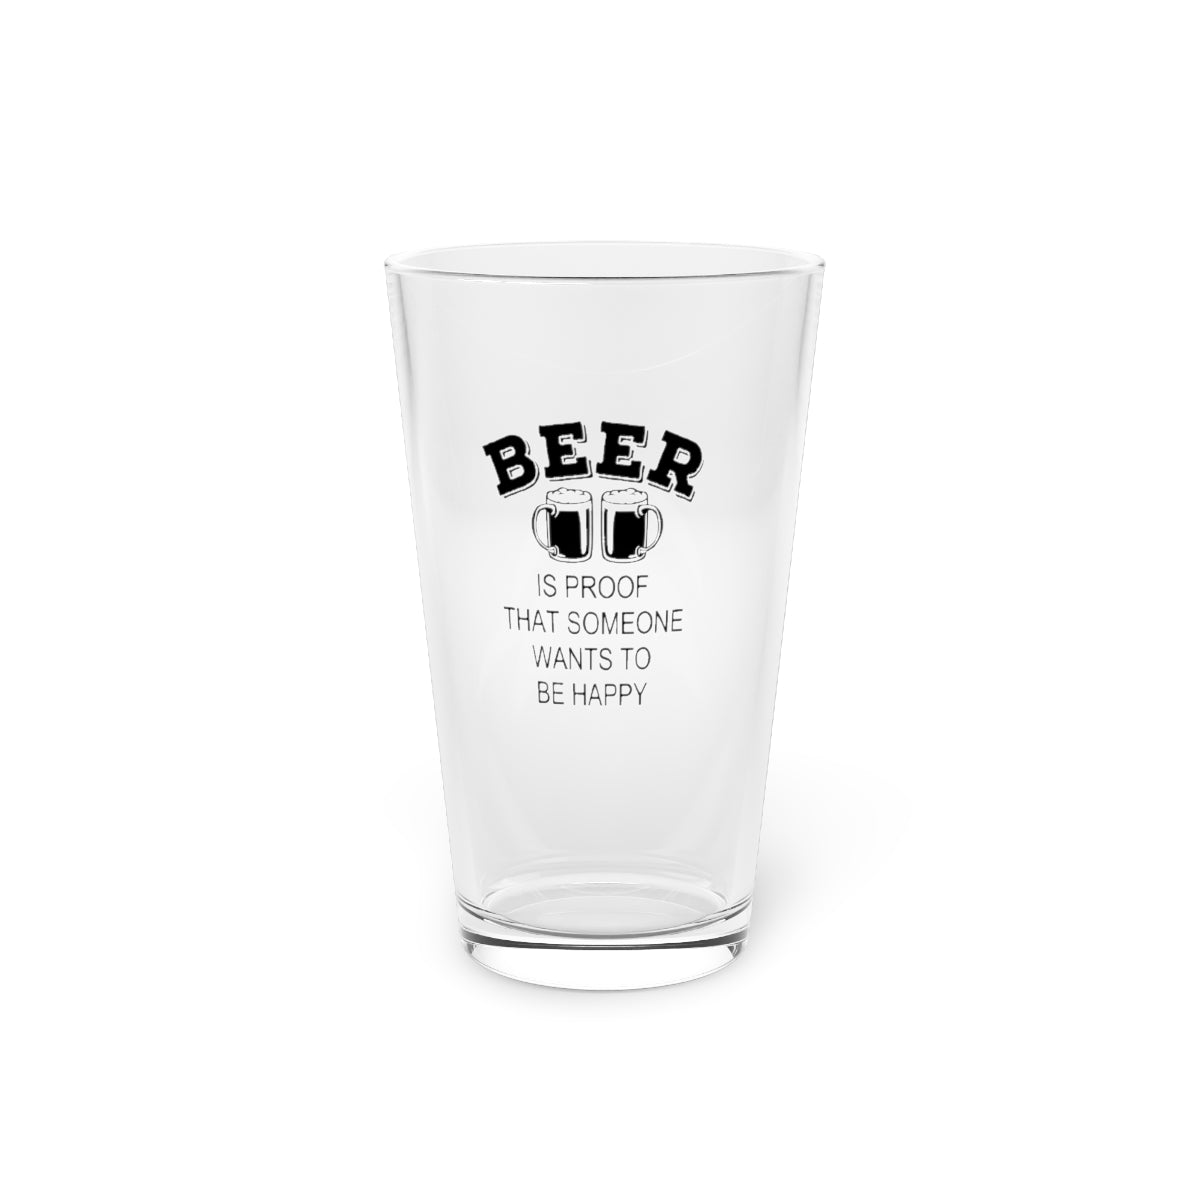 Beer is Proff Someone Wants to Be Happy  | Funny Beer Glass